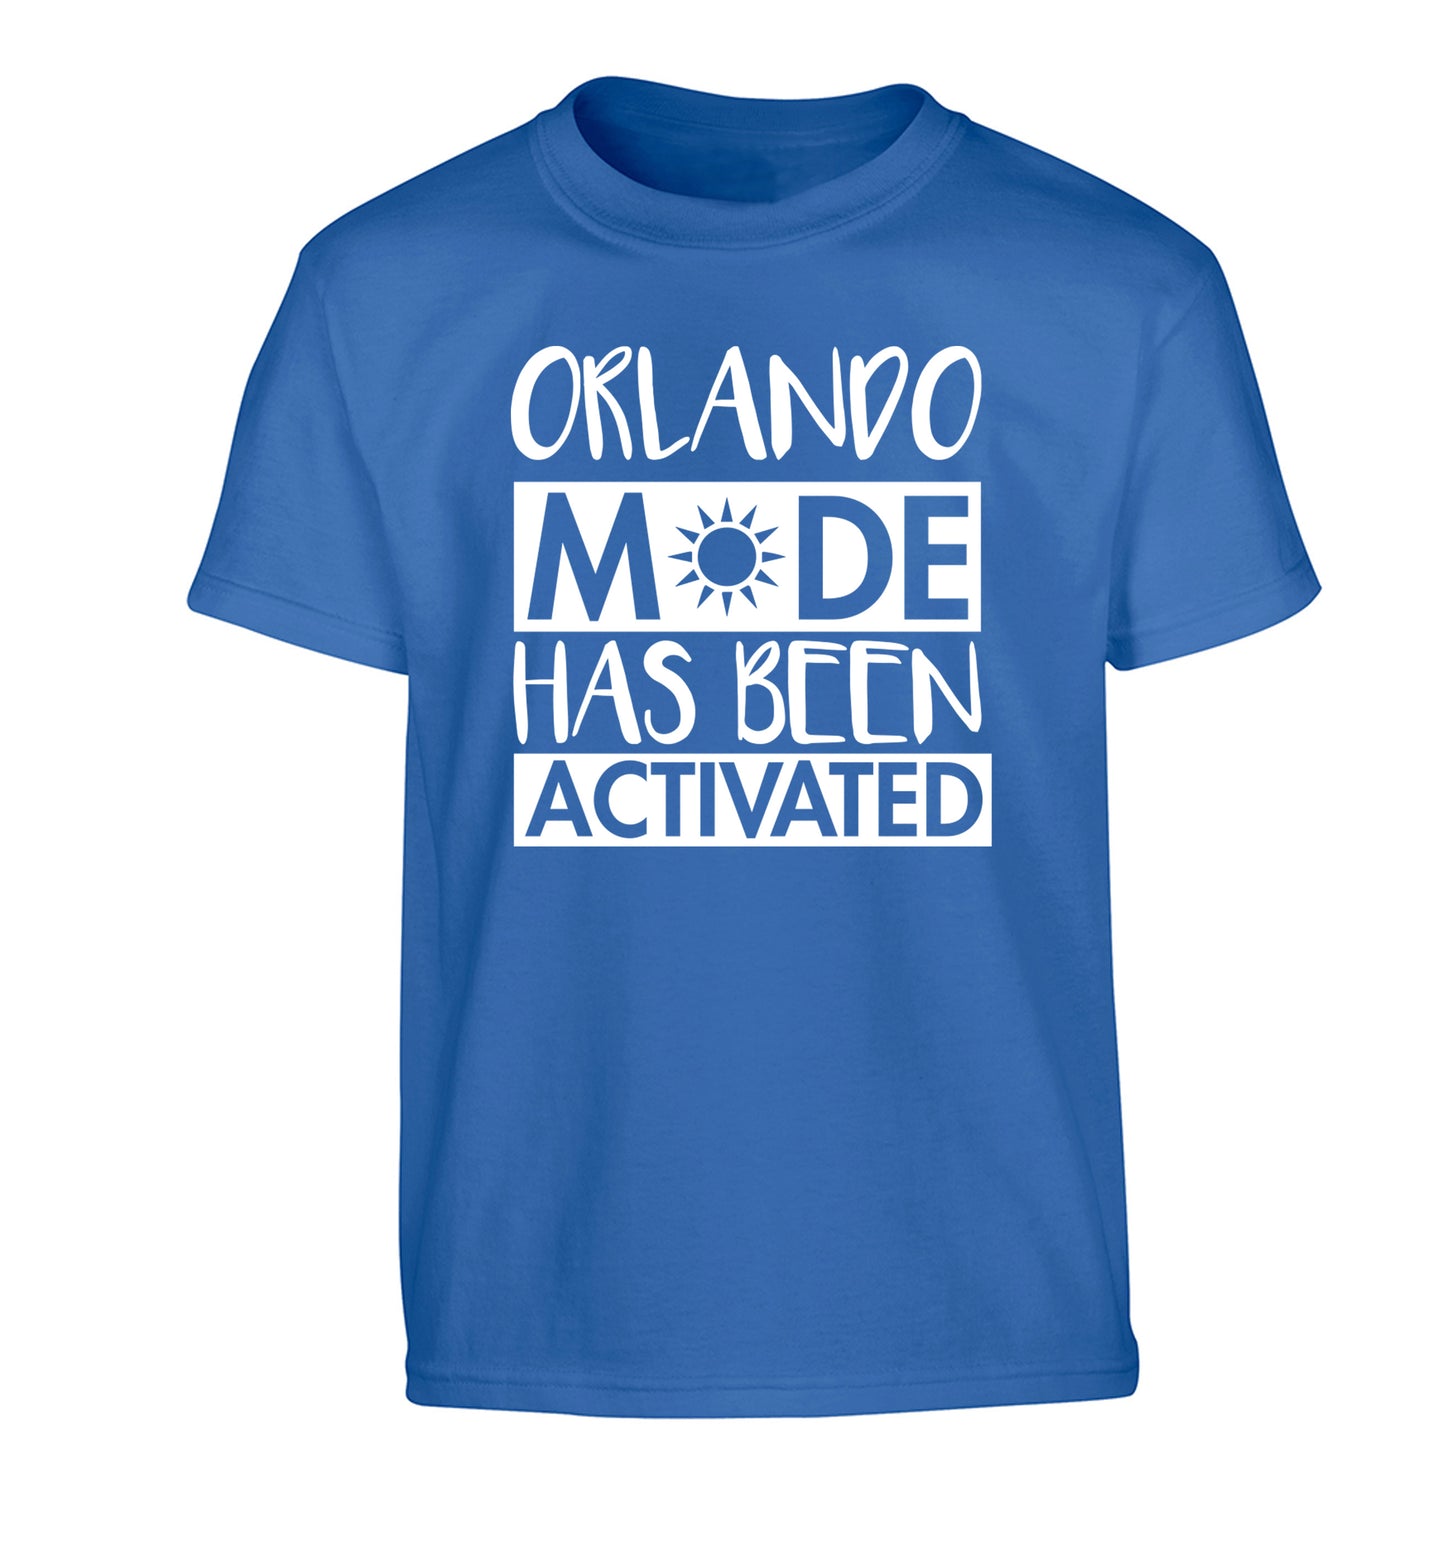 Orlando mode has been activated Children's blue Tshirt 12-13 Years